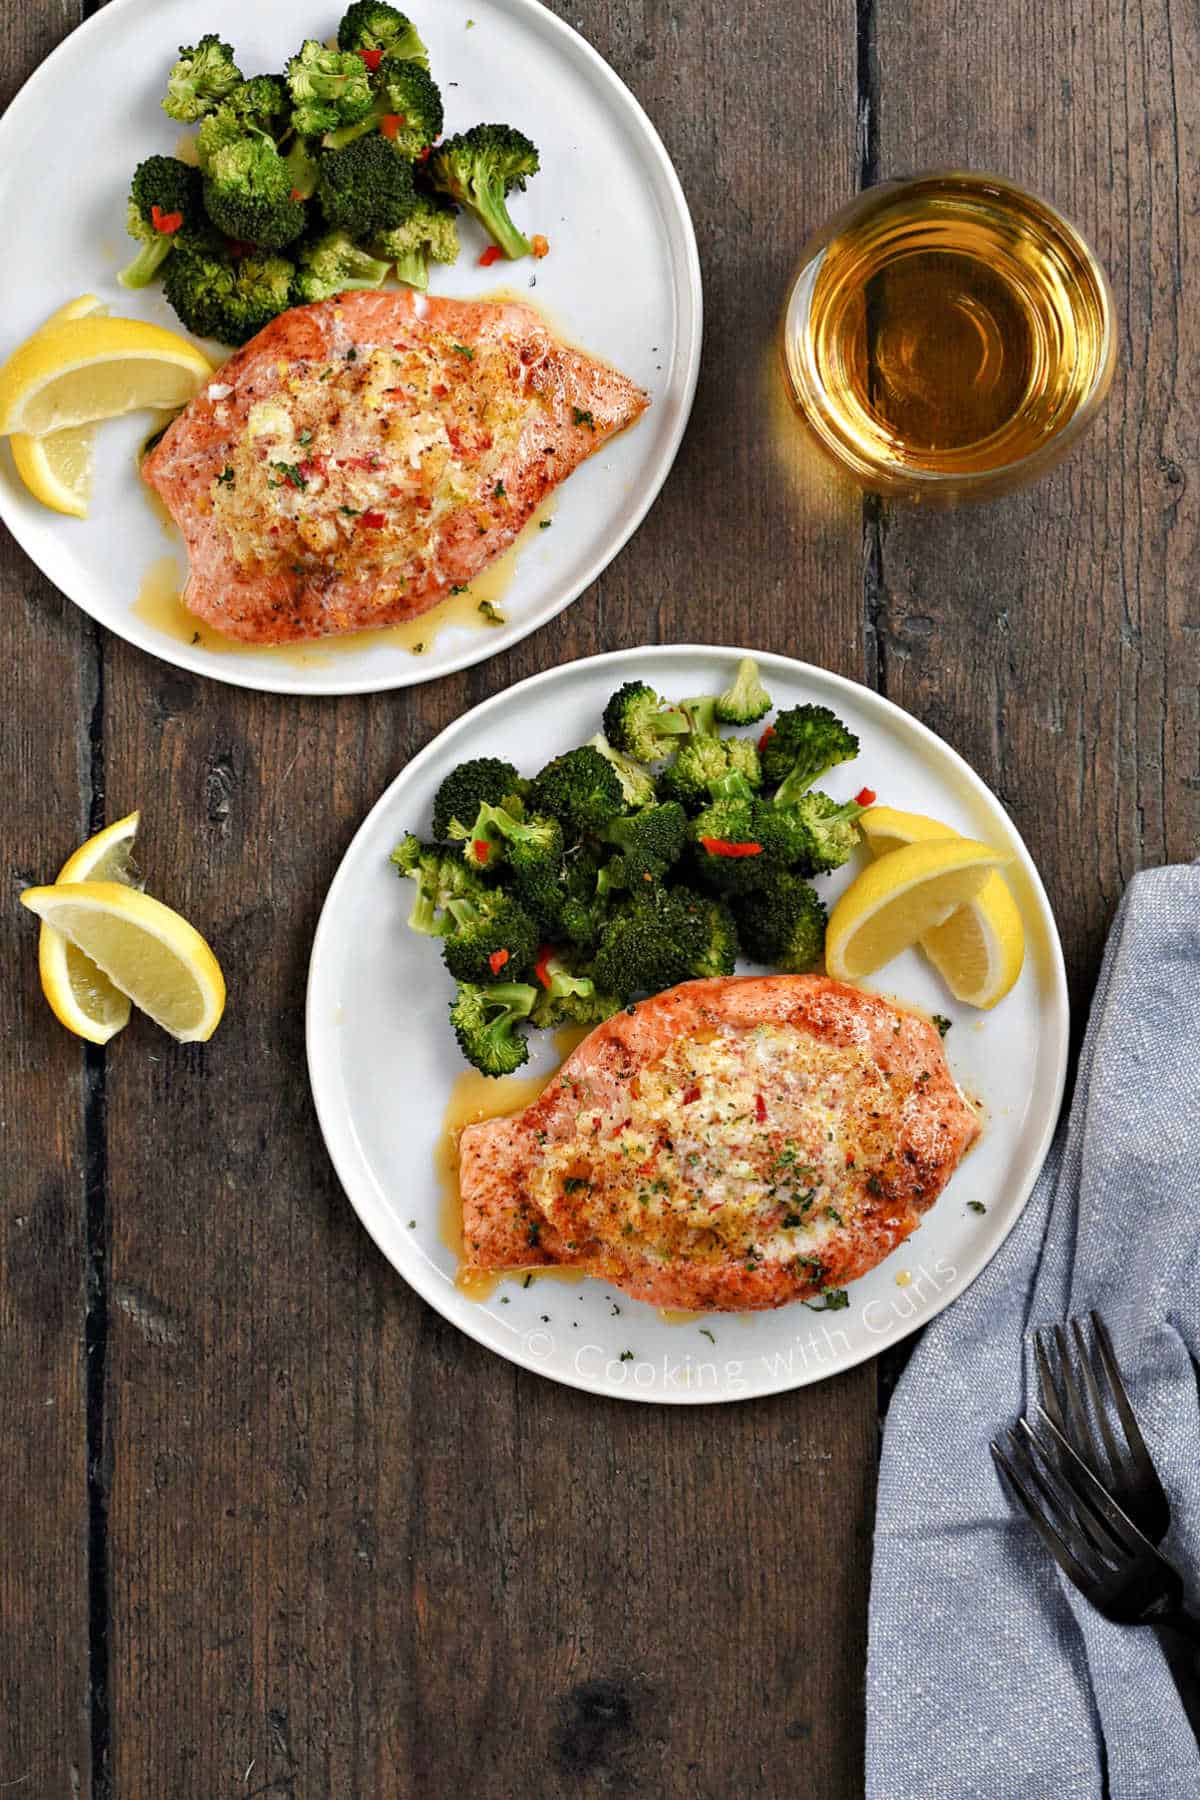 Two plates with crab stuffed salmon, broccoli and lemon wedges with a glass of white wine in the background.